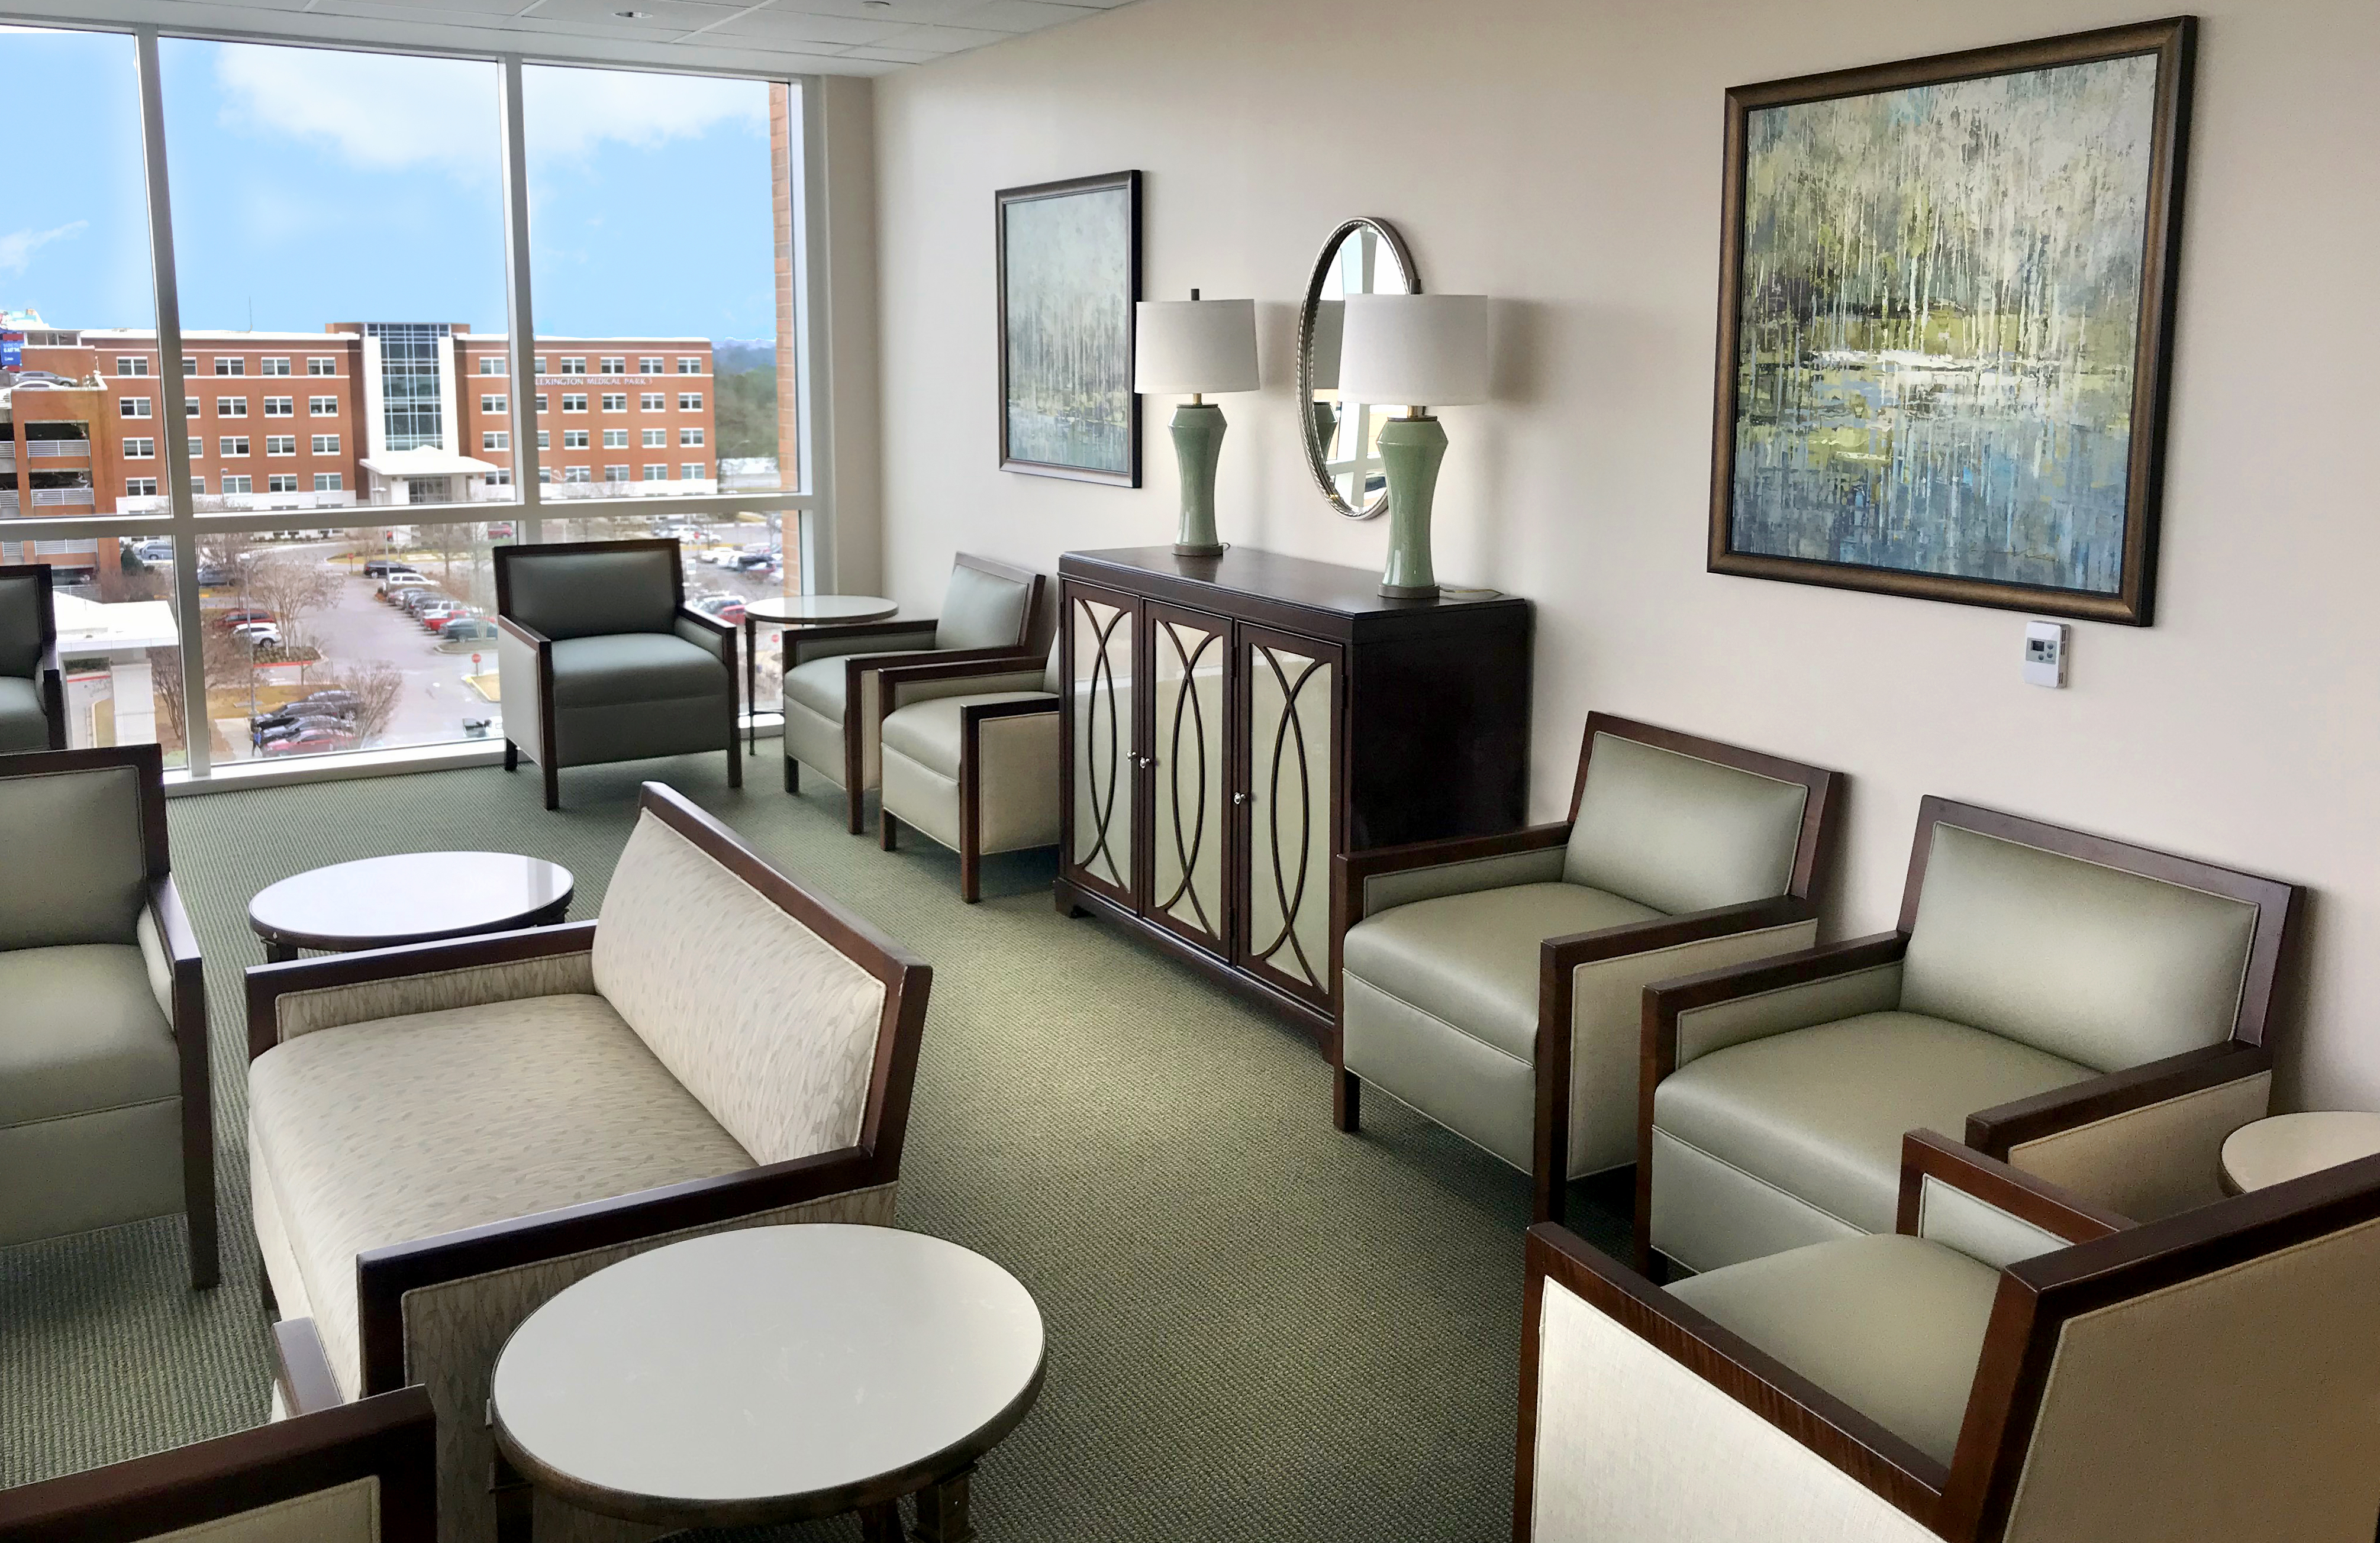 Floor to ceiling windows flood the new tower’s beautifully decorated spaces with natural light.